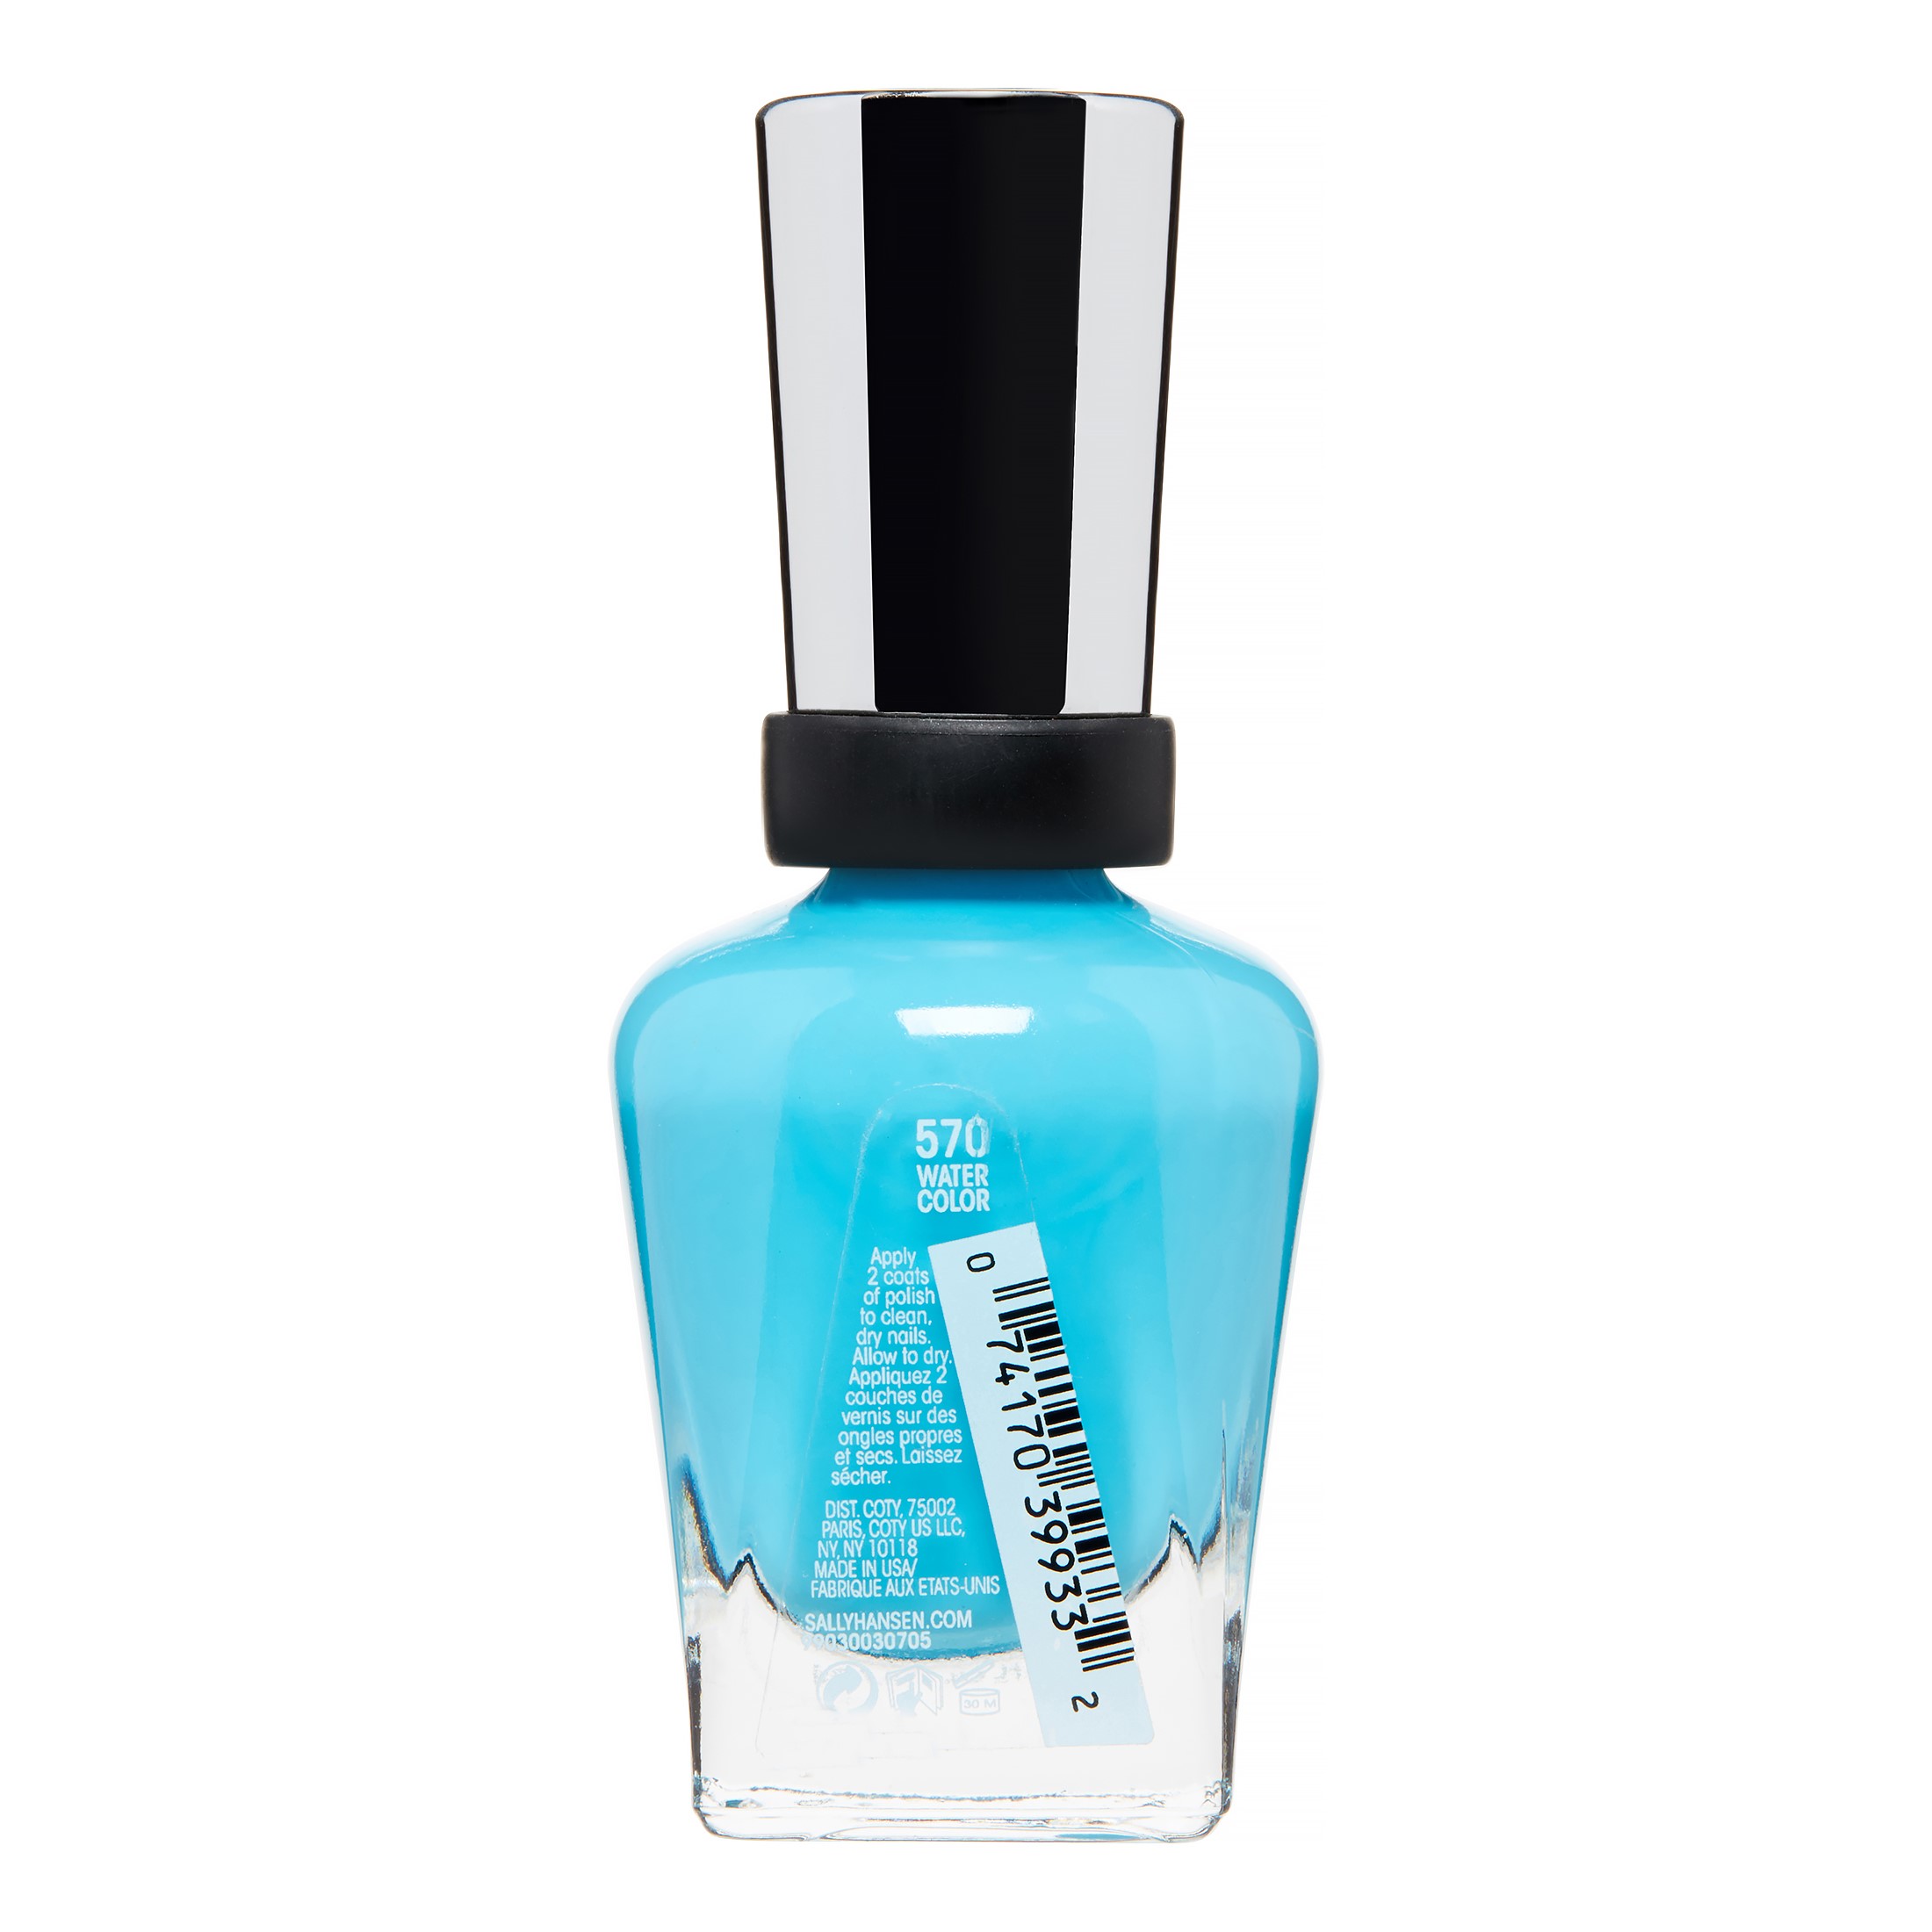 Sally Hansen Complete Salon Manicure Nail Polish, Water Color - image 3 of 3